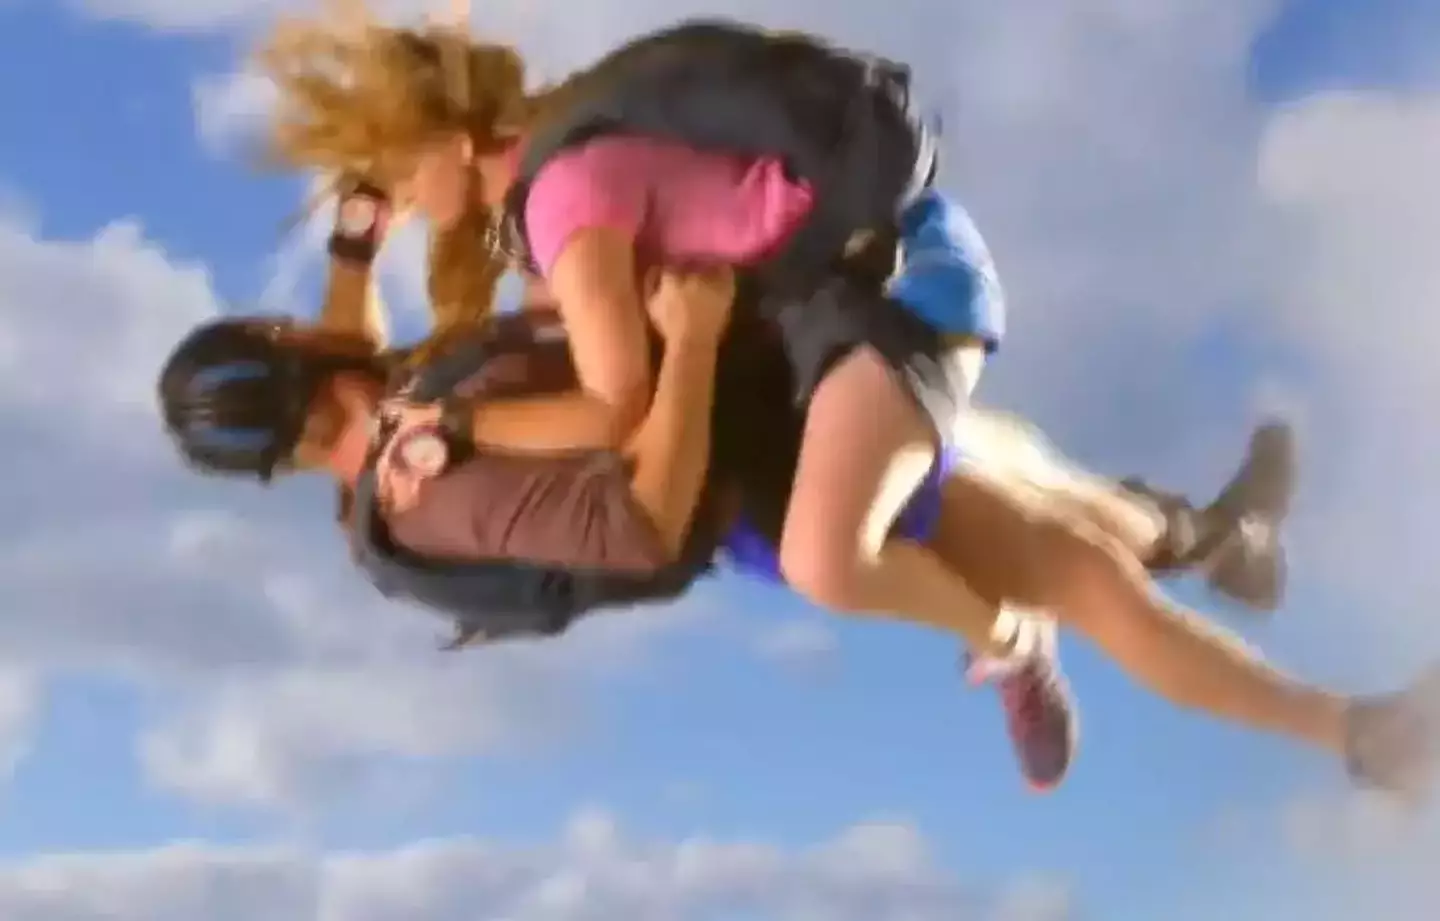 I don't think that's an officially sanctioned skydiving position. (TLC)